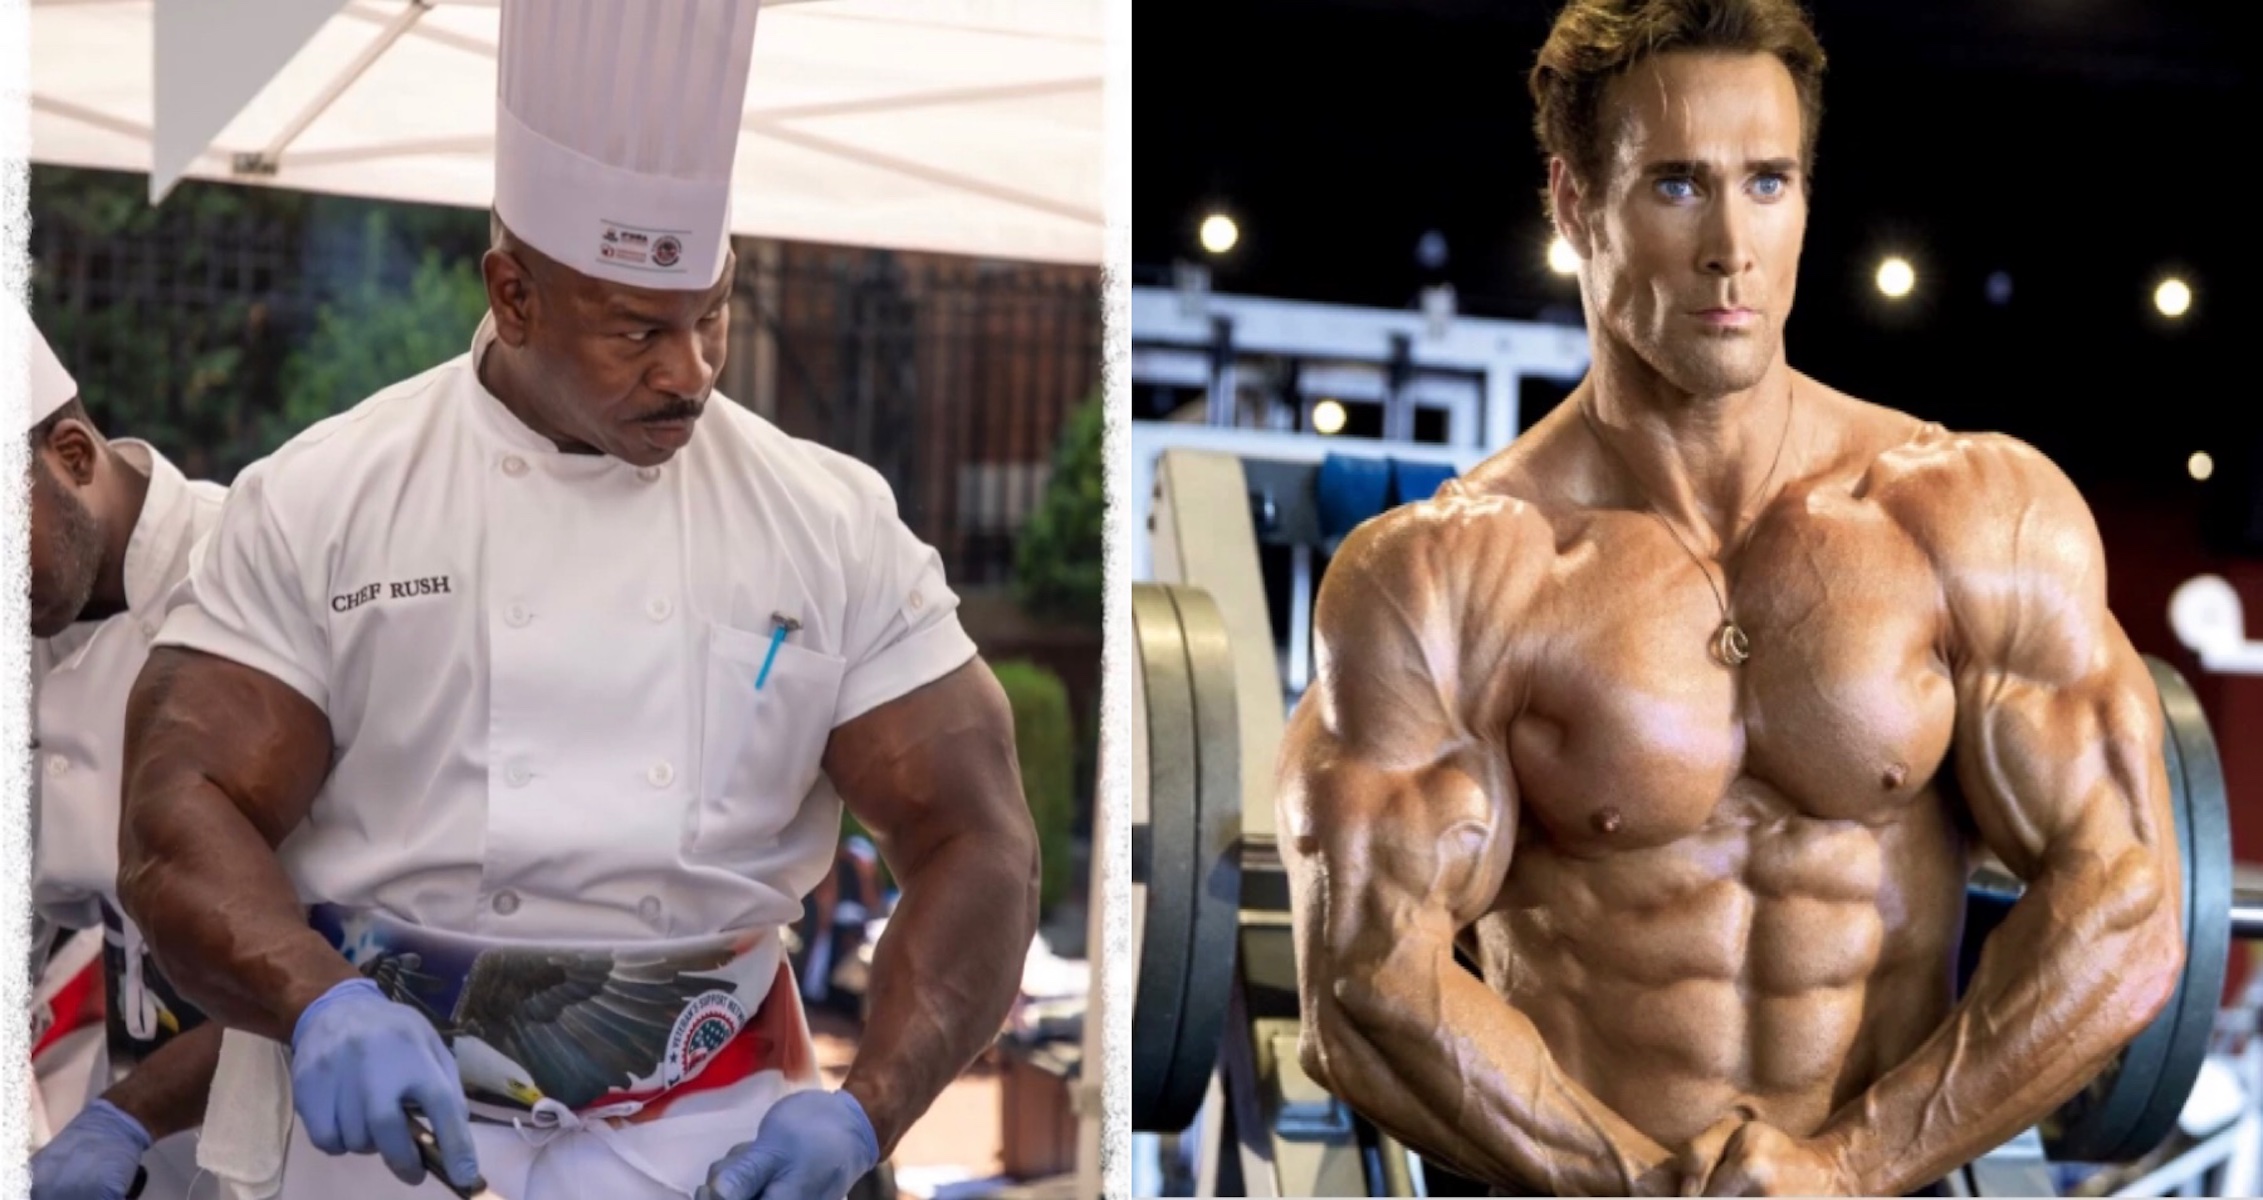 White House Chef Andre Rush Joins Mike O’Hearn For Arm Day